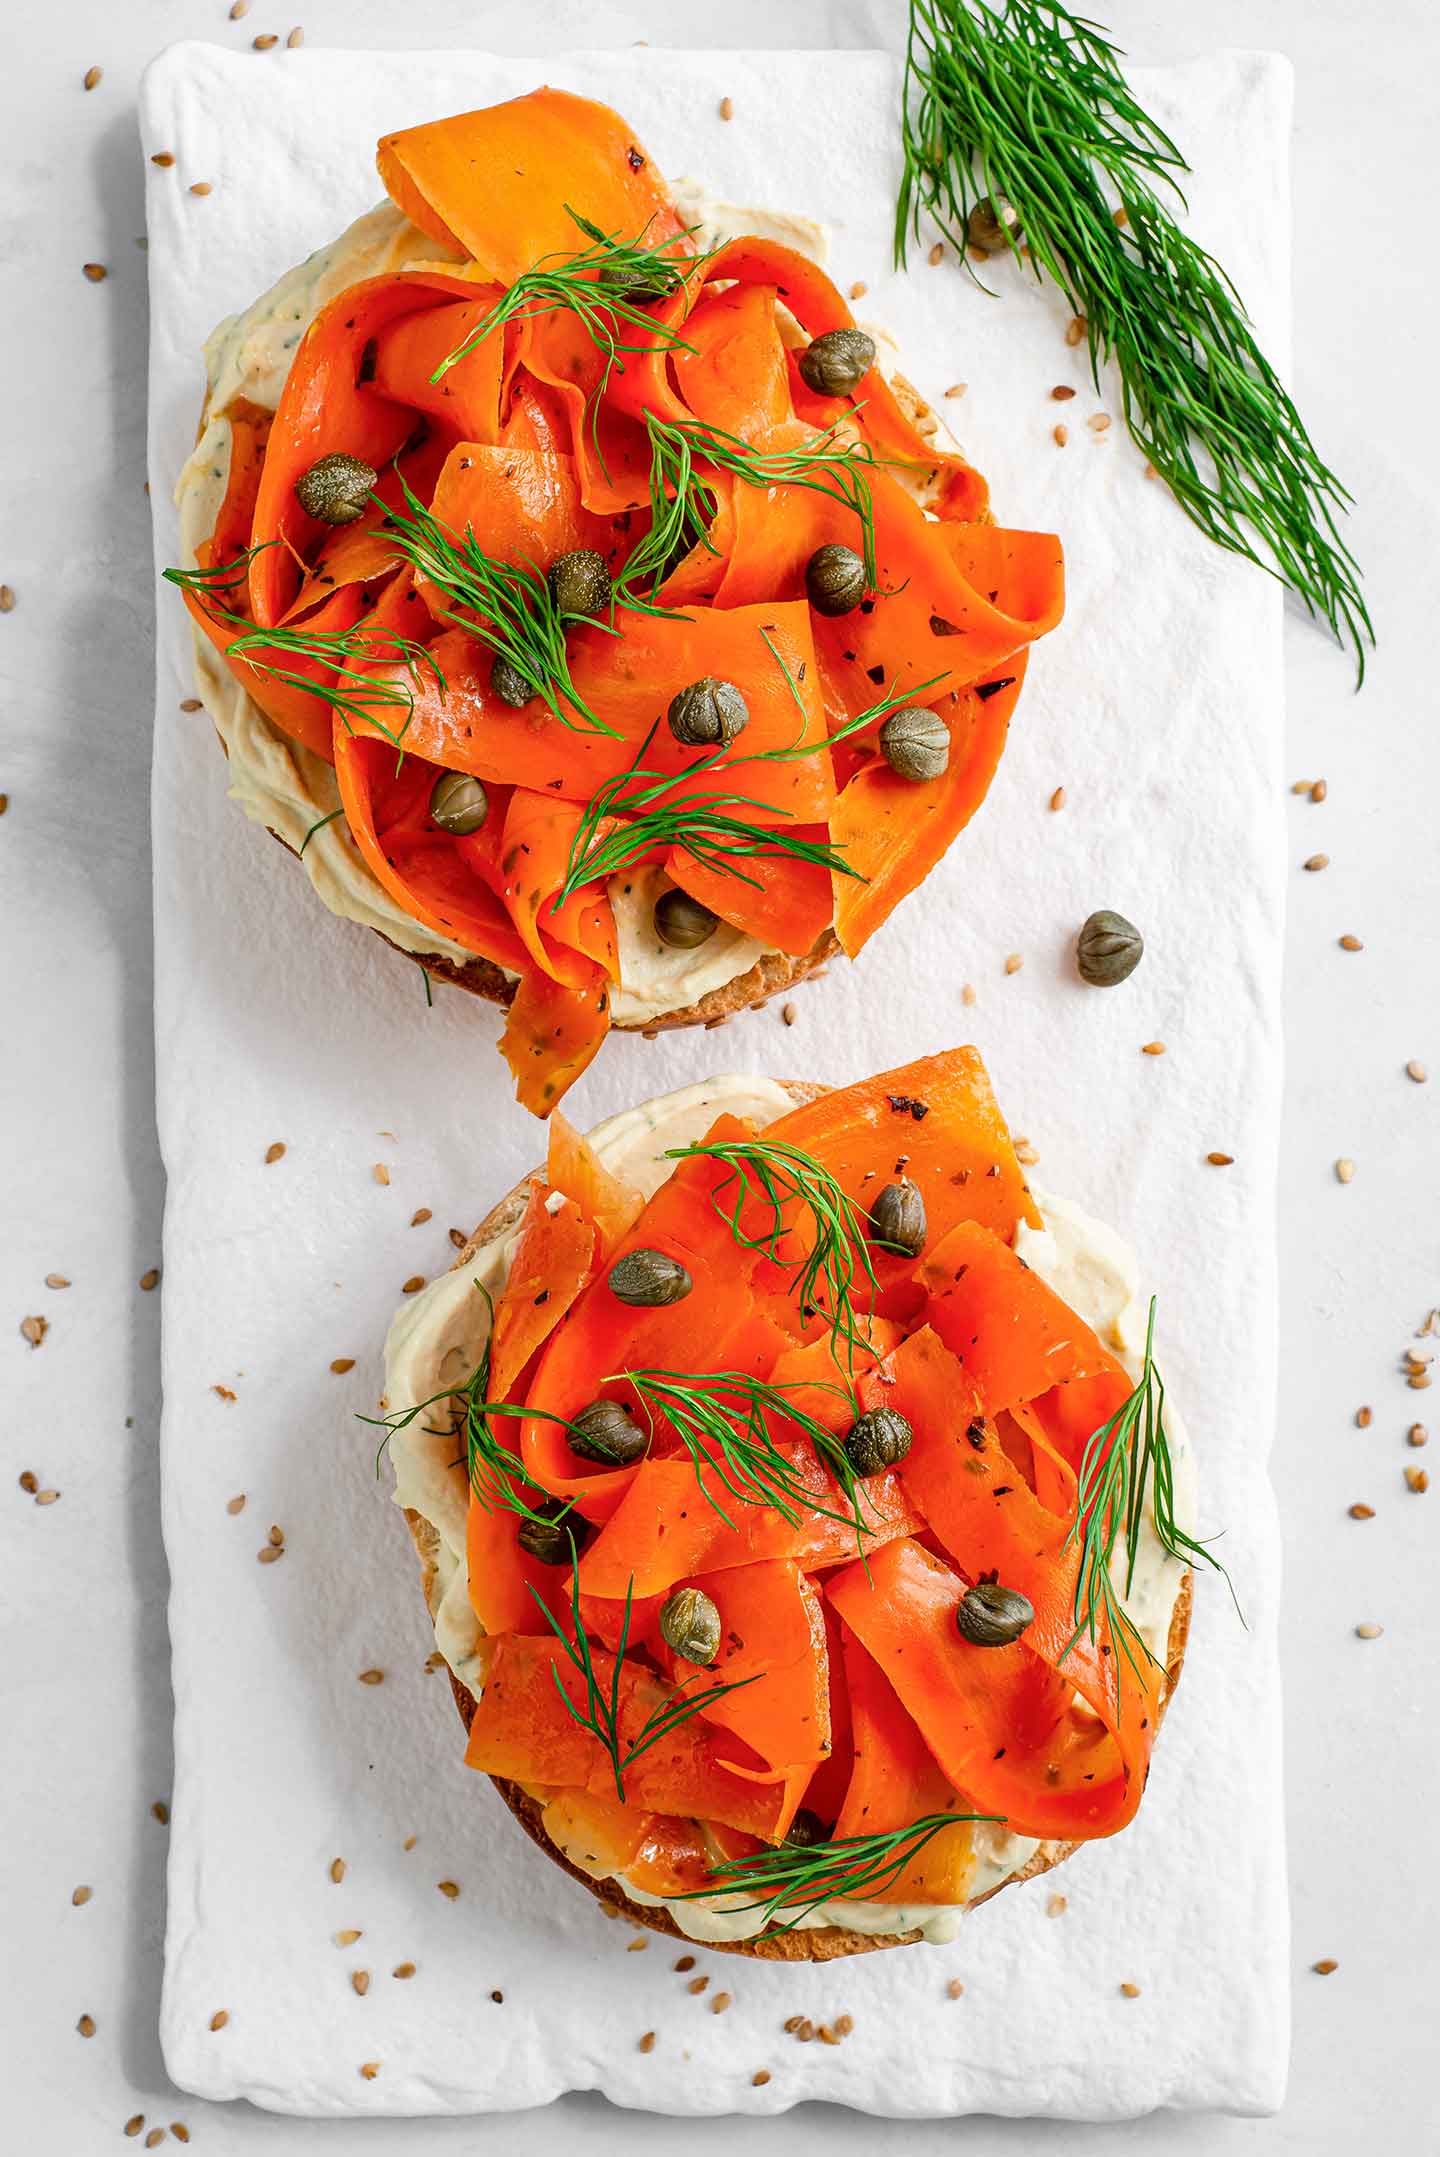 Top down view of two open-faced smoky lox breakfast bagels. The vibrant carrot lox is curled like smoked salmon and glistening from the marinade. Capers and dill garnish the top. The two halves are presented on a white tray.